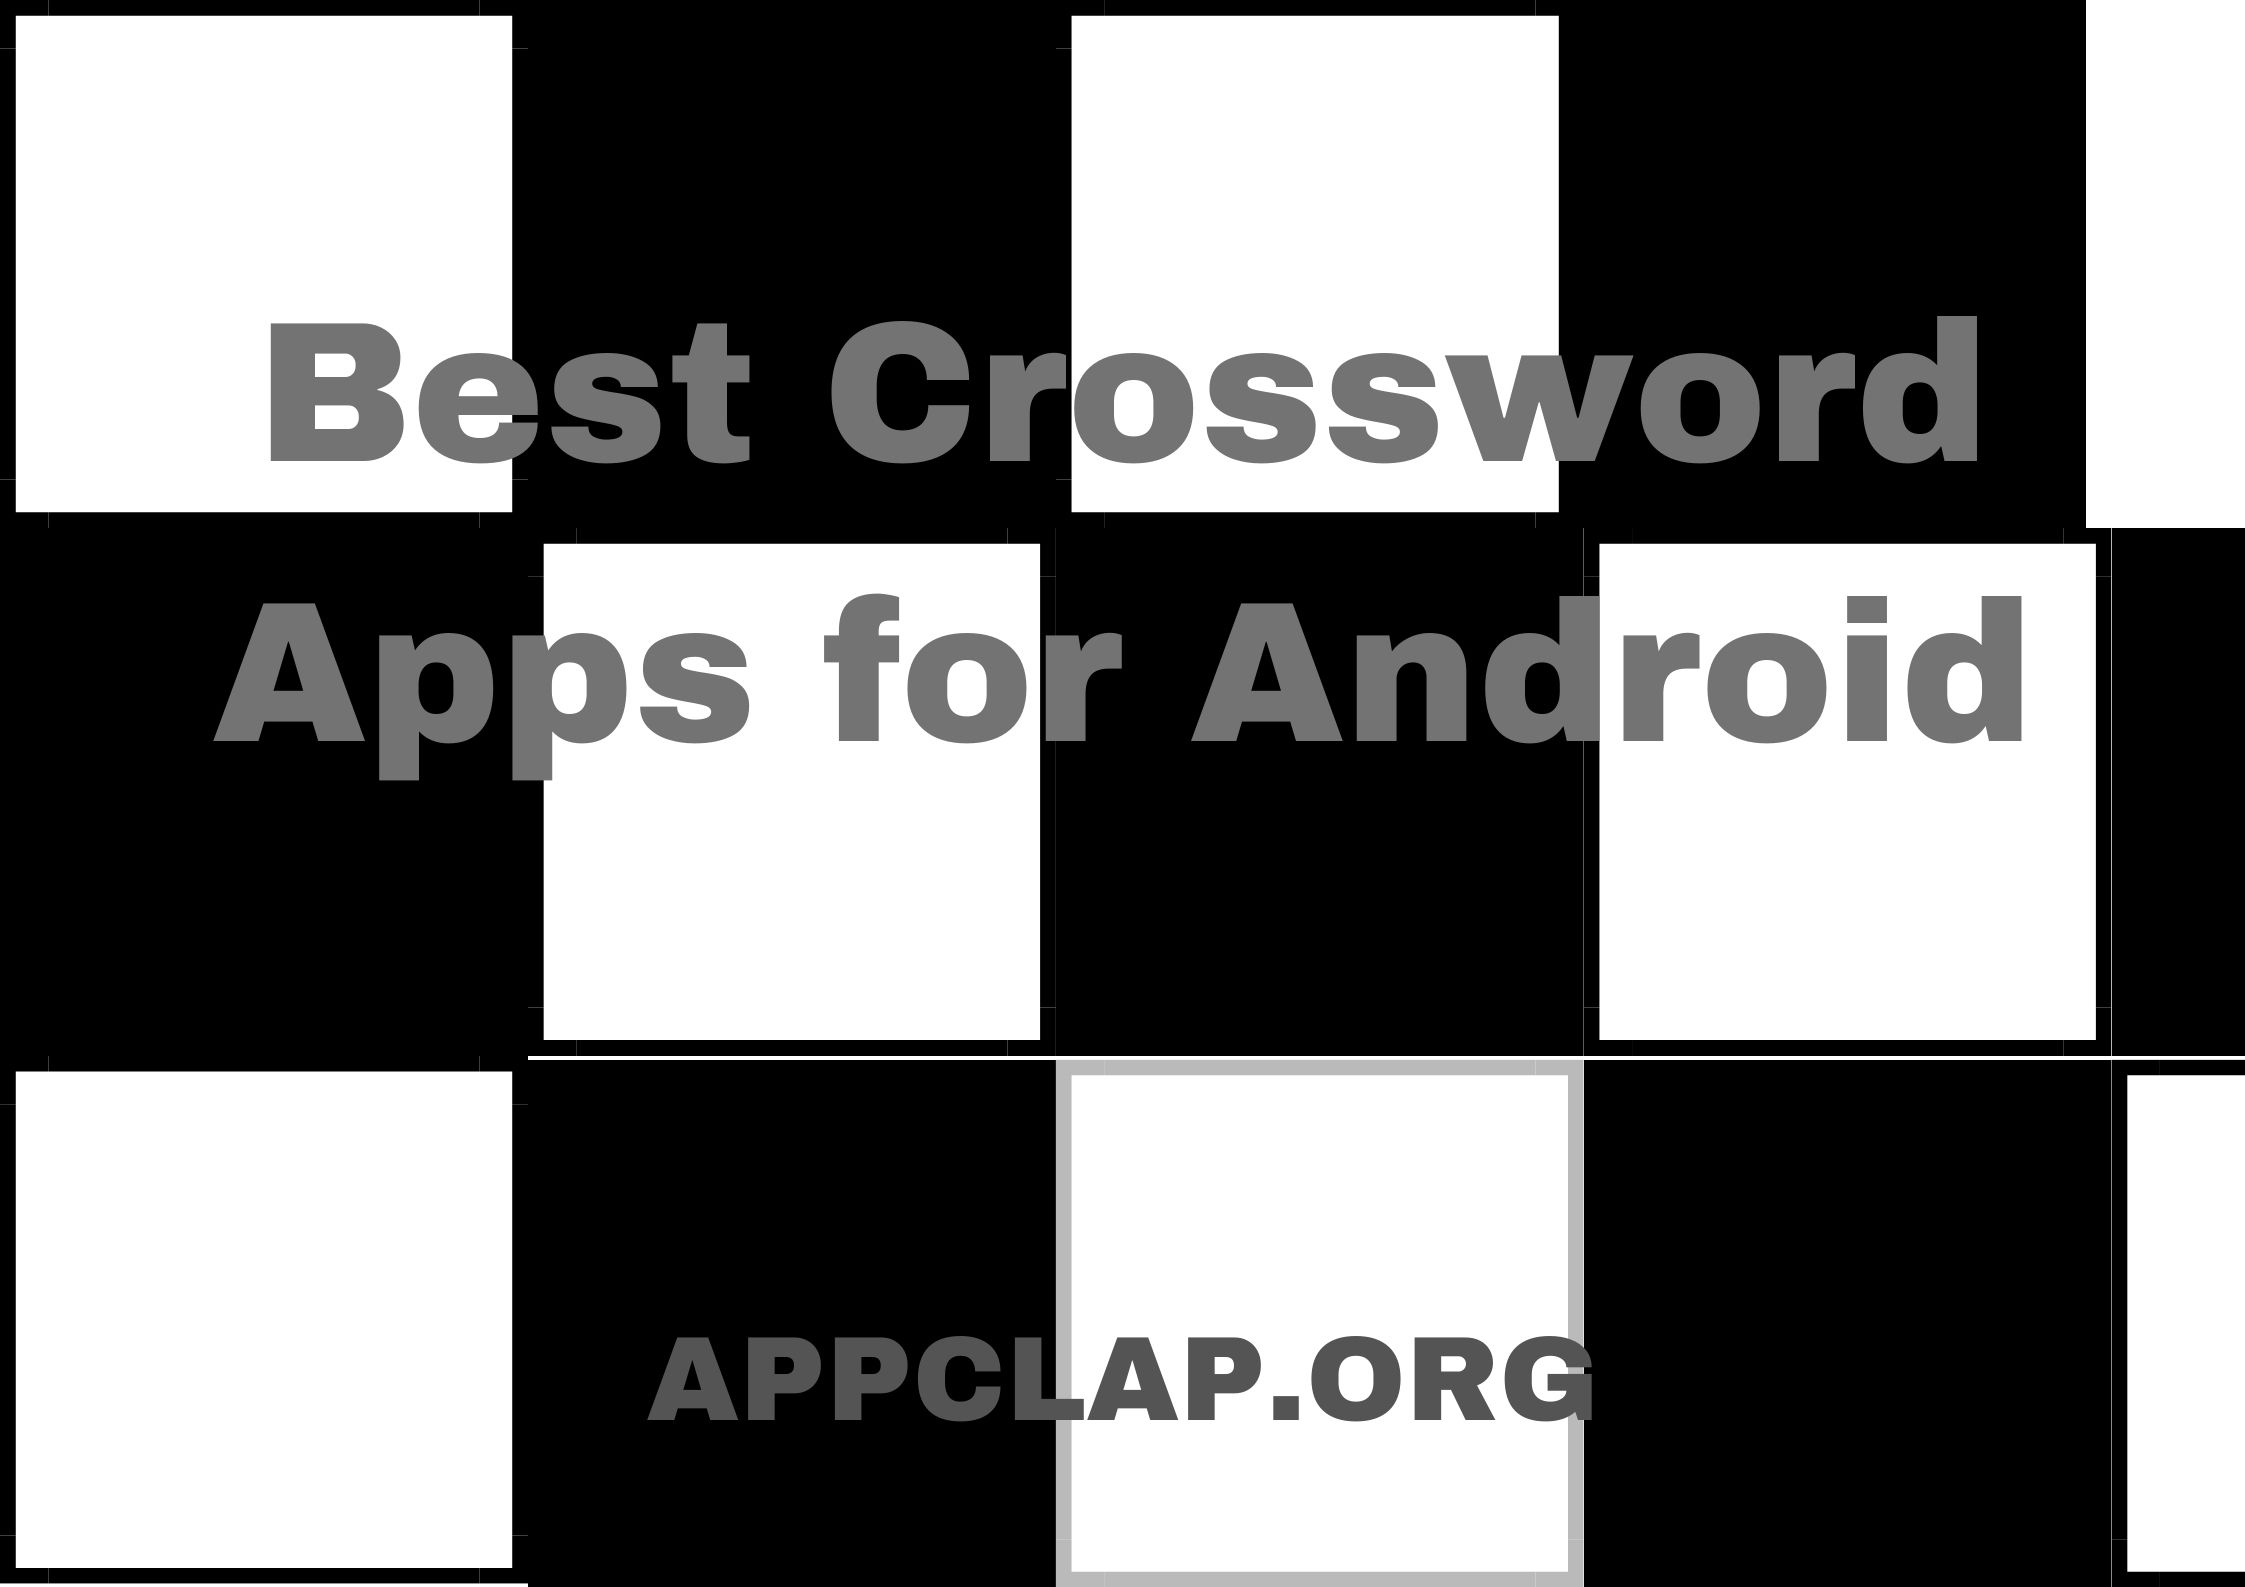 Best Crossword Apps for Android